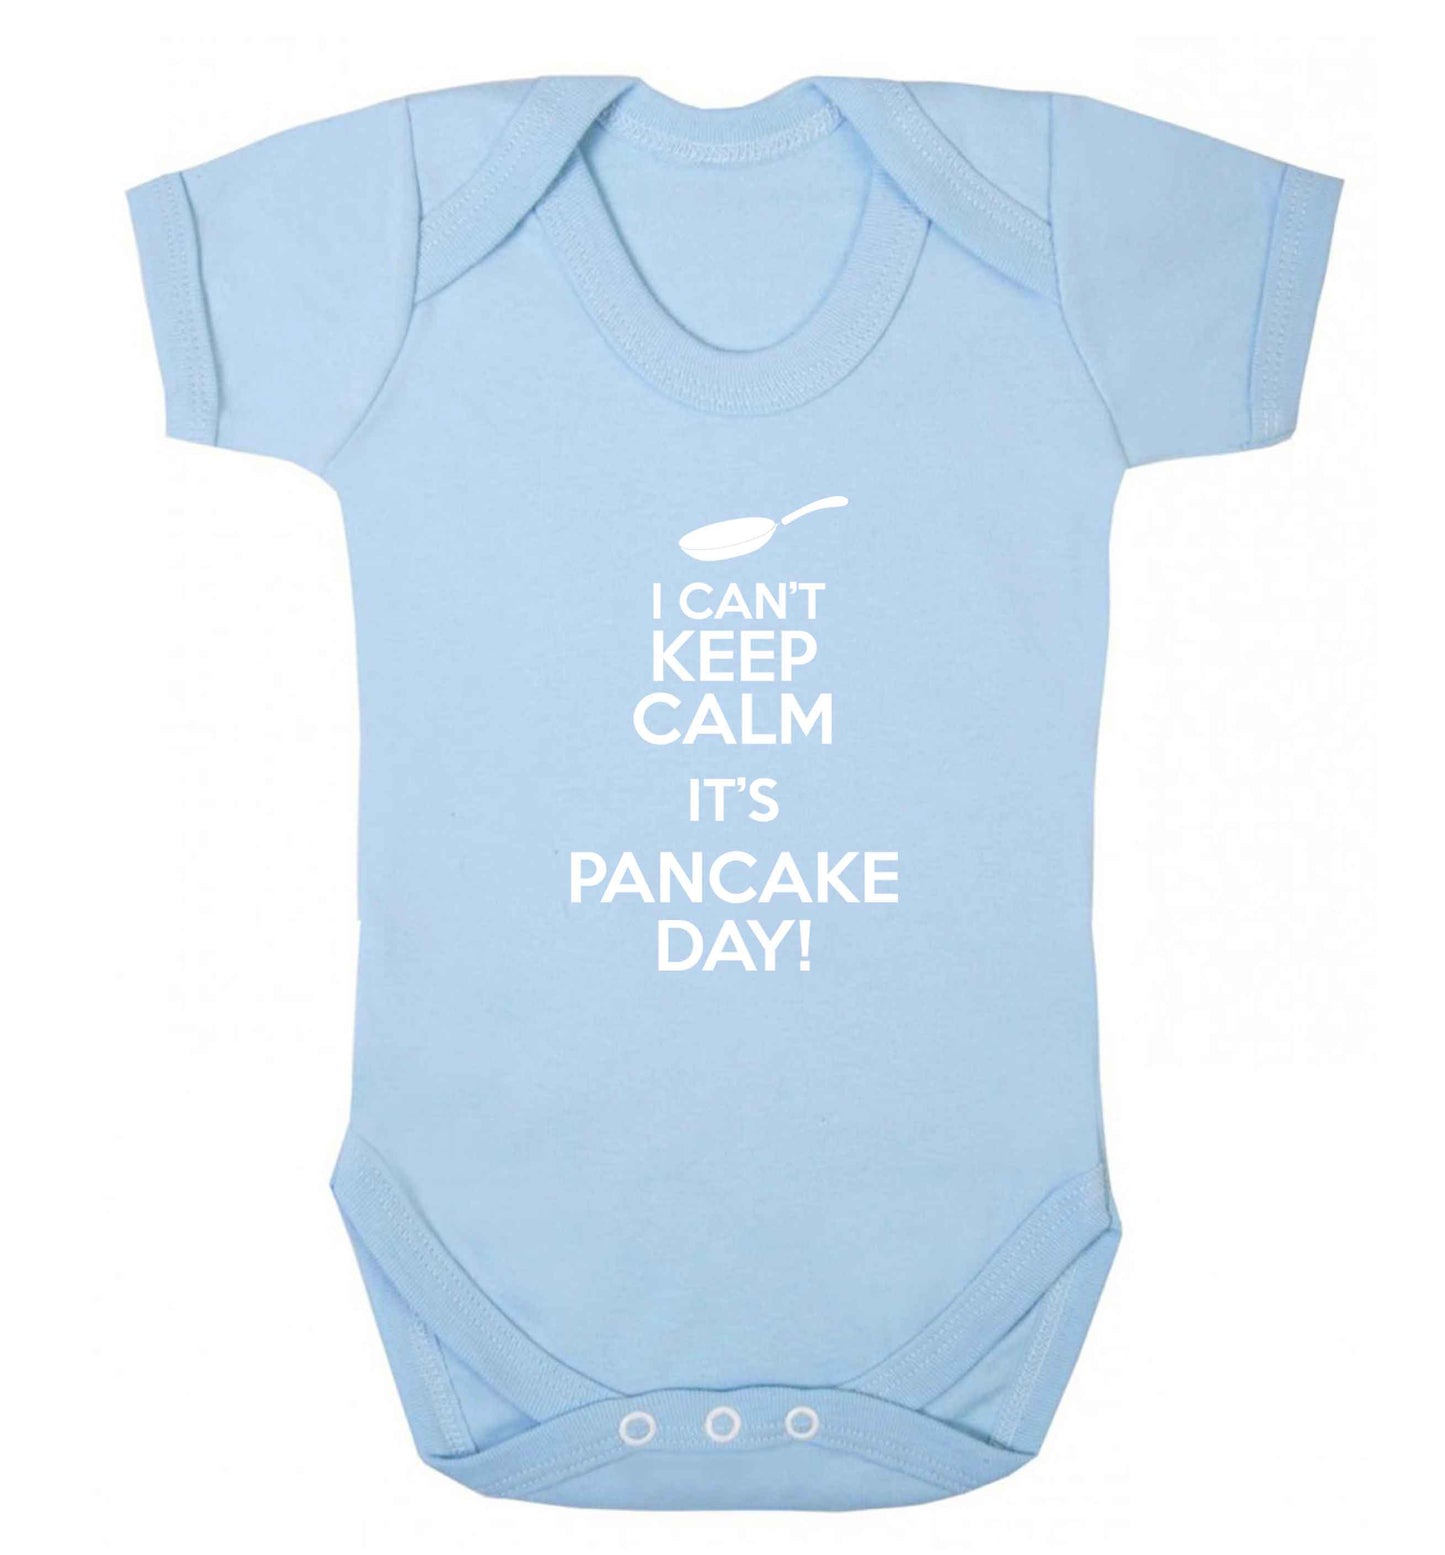 I can't keep calm it's pancake day! baby vest pale blue 18-24 months